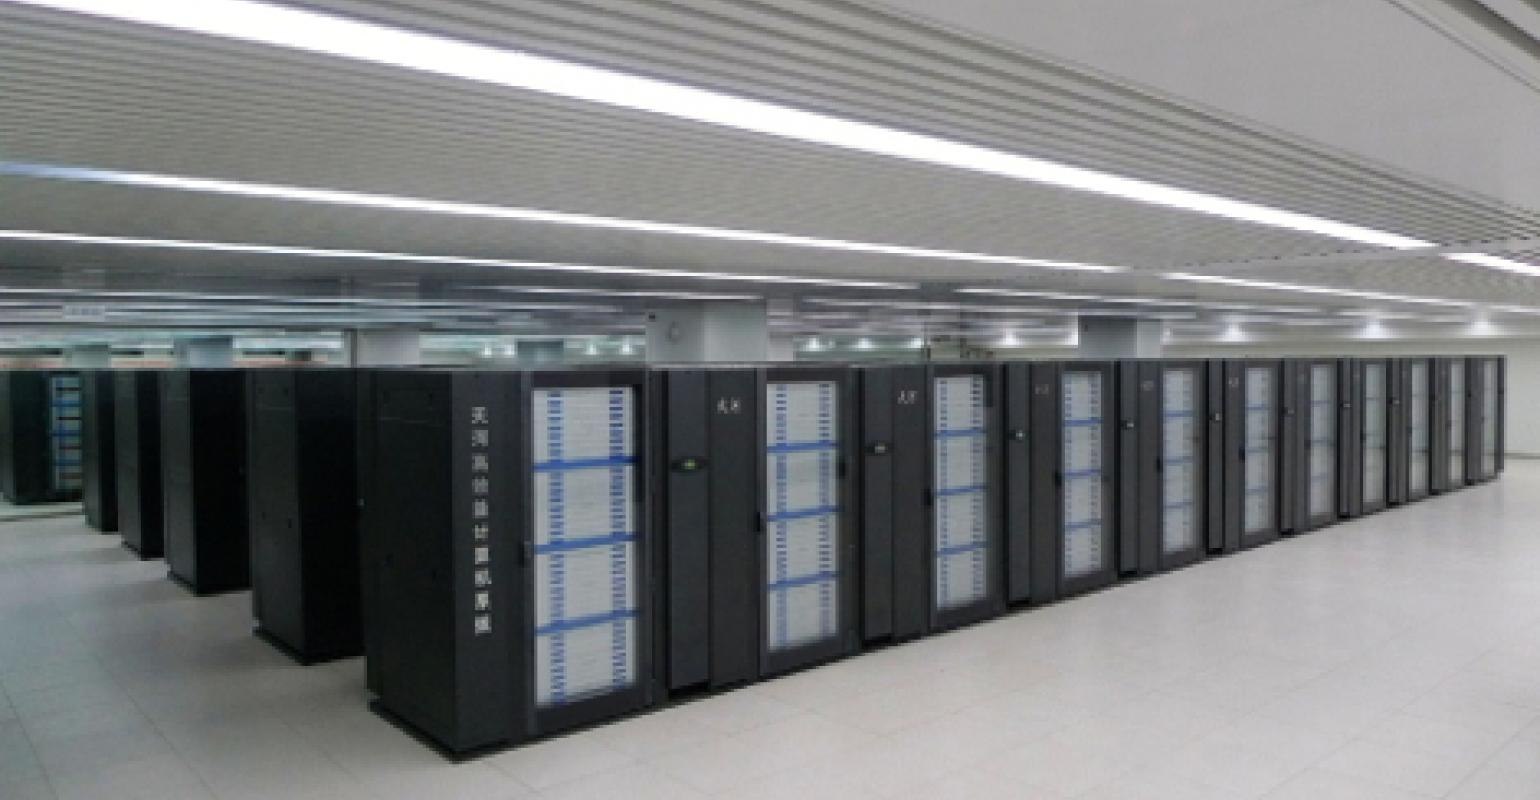 China Restarts One of World's Fastest Supercomputers | Data Center  Knowledge | News and analysis for the data center industry